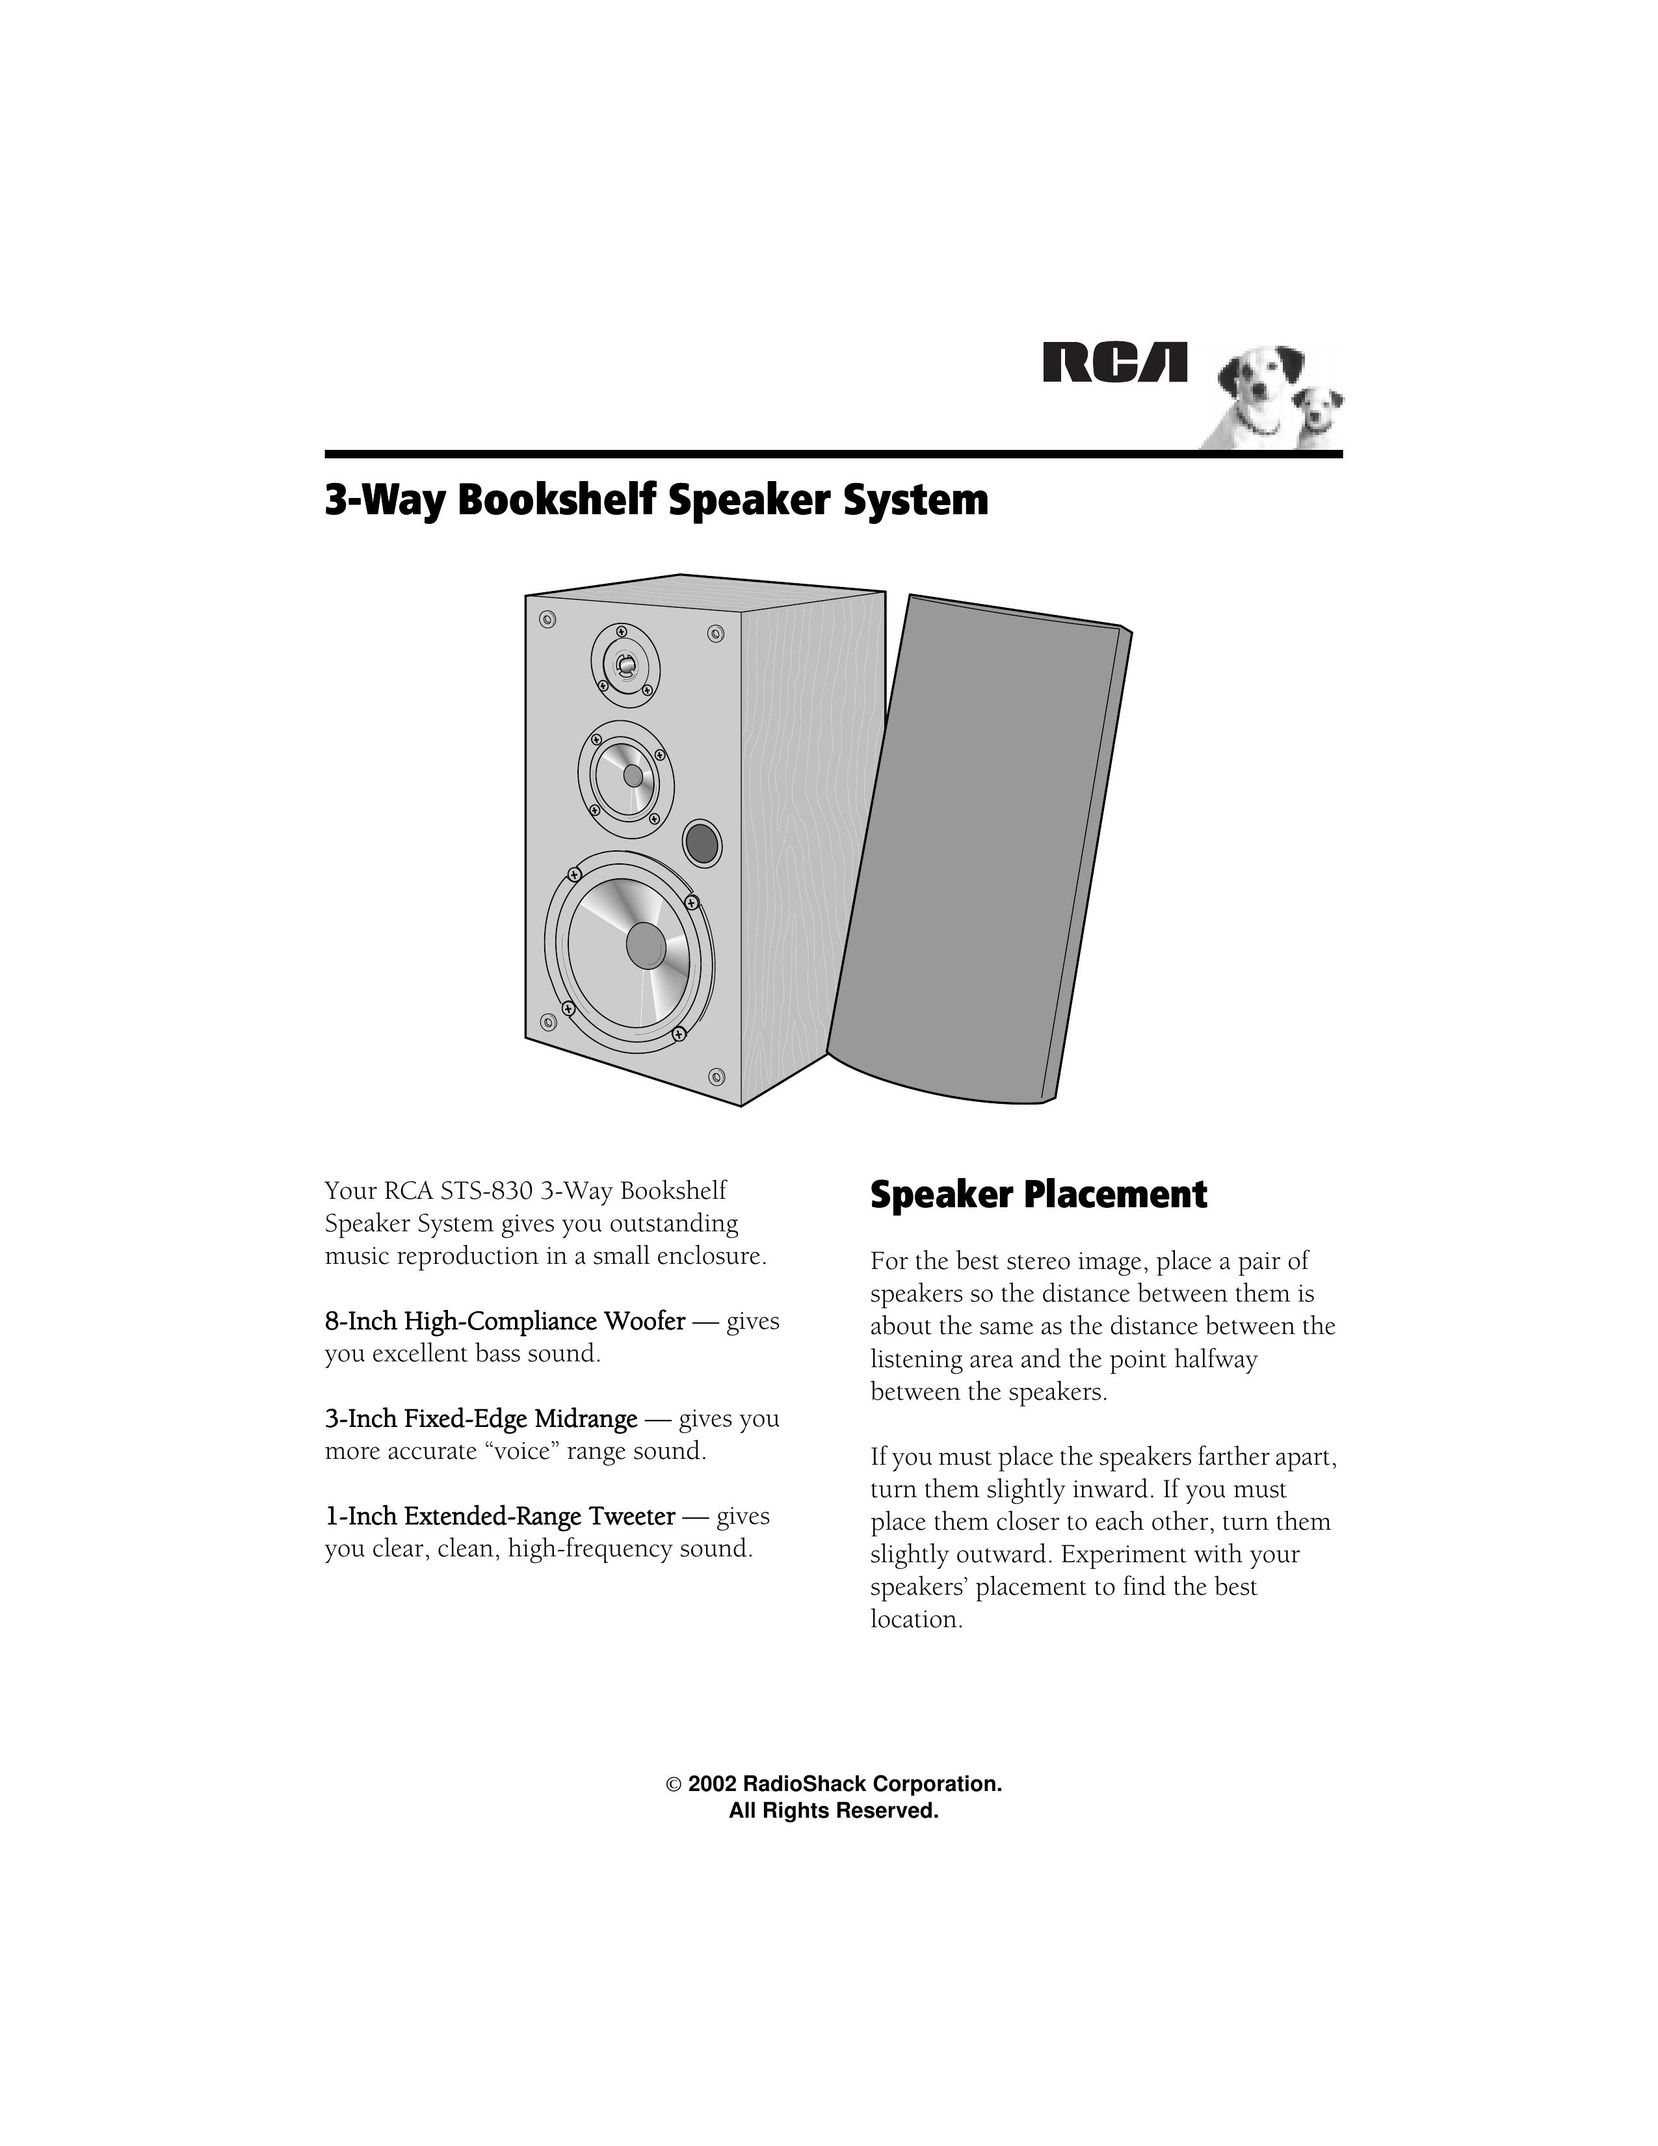 RCA STS-830 Speaker System User Manual